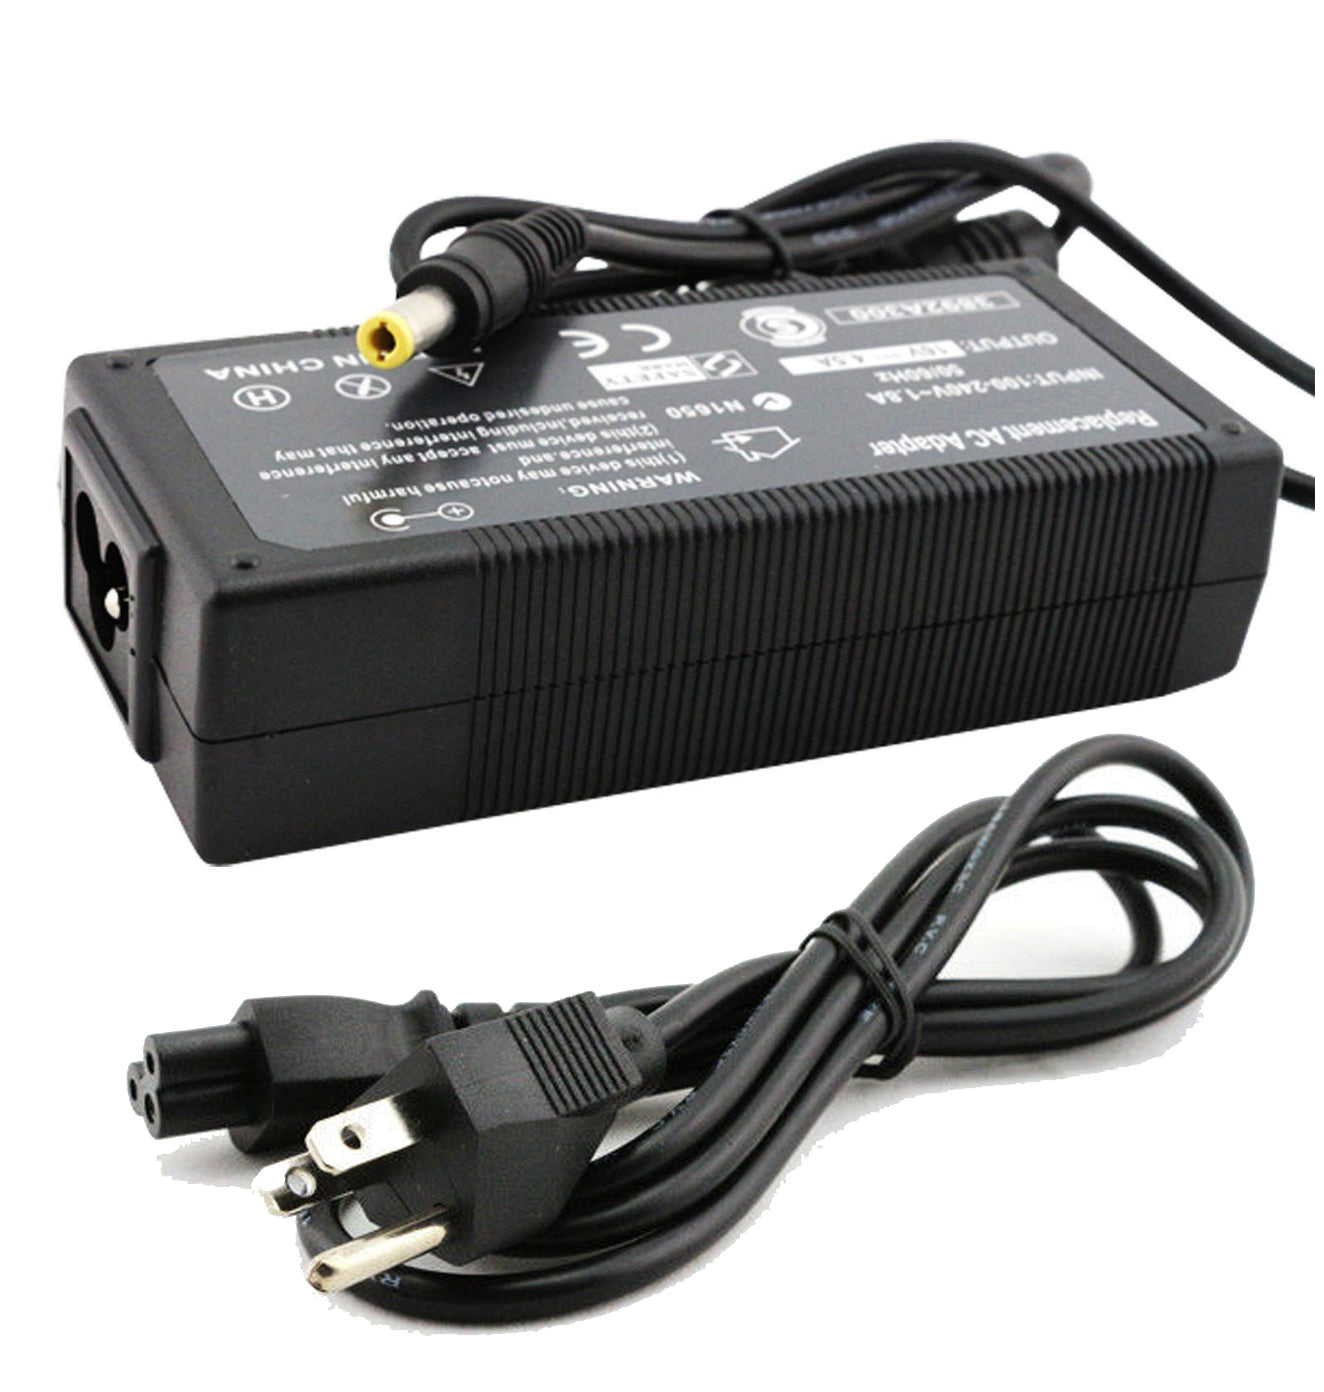 AC Adapter Charger for Panasonic Toughbook CF-R7 Notebook.